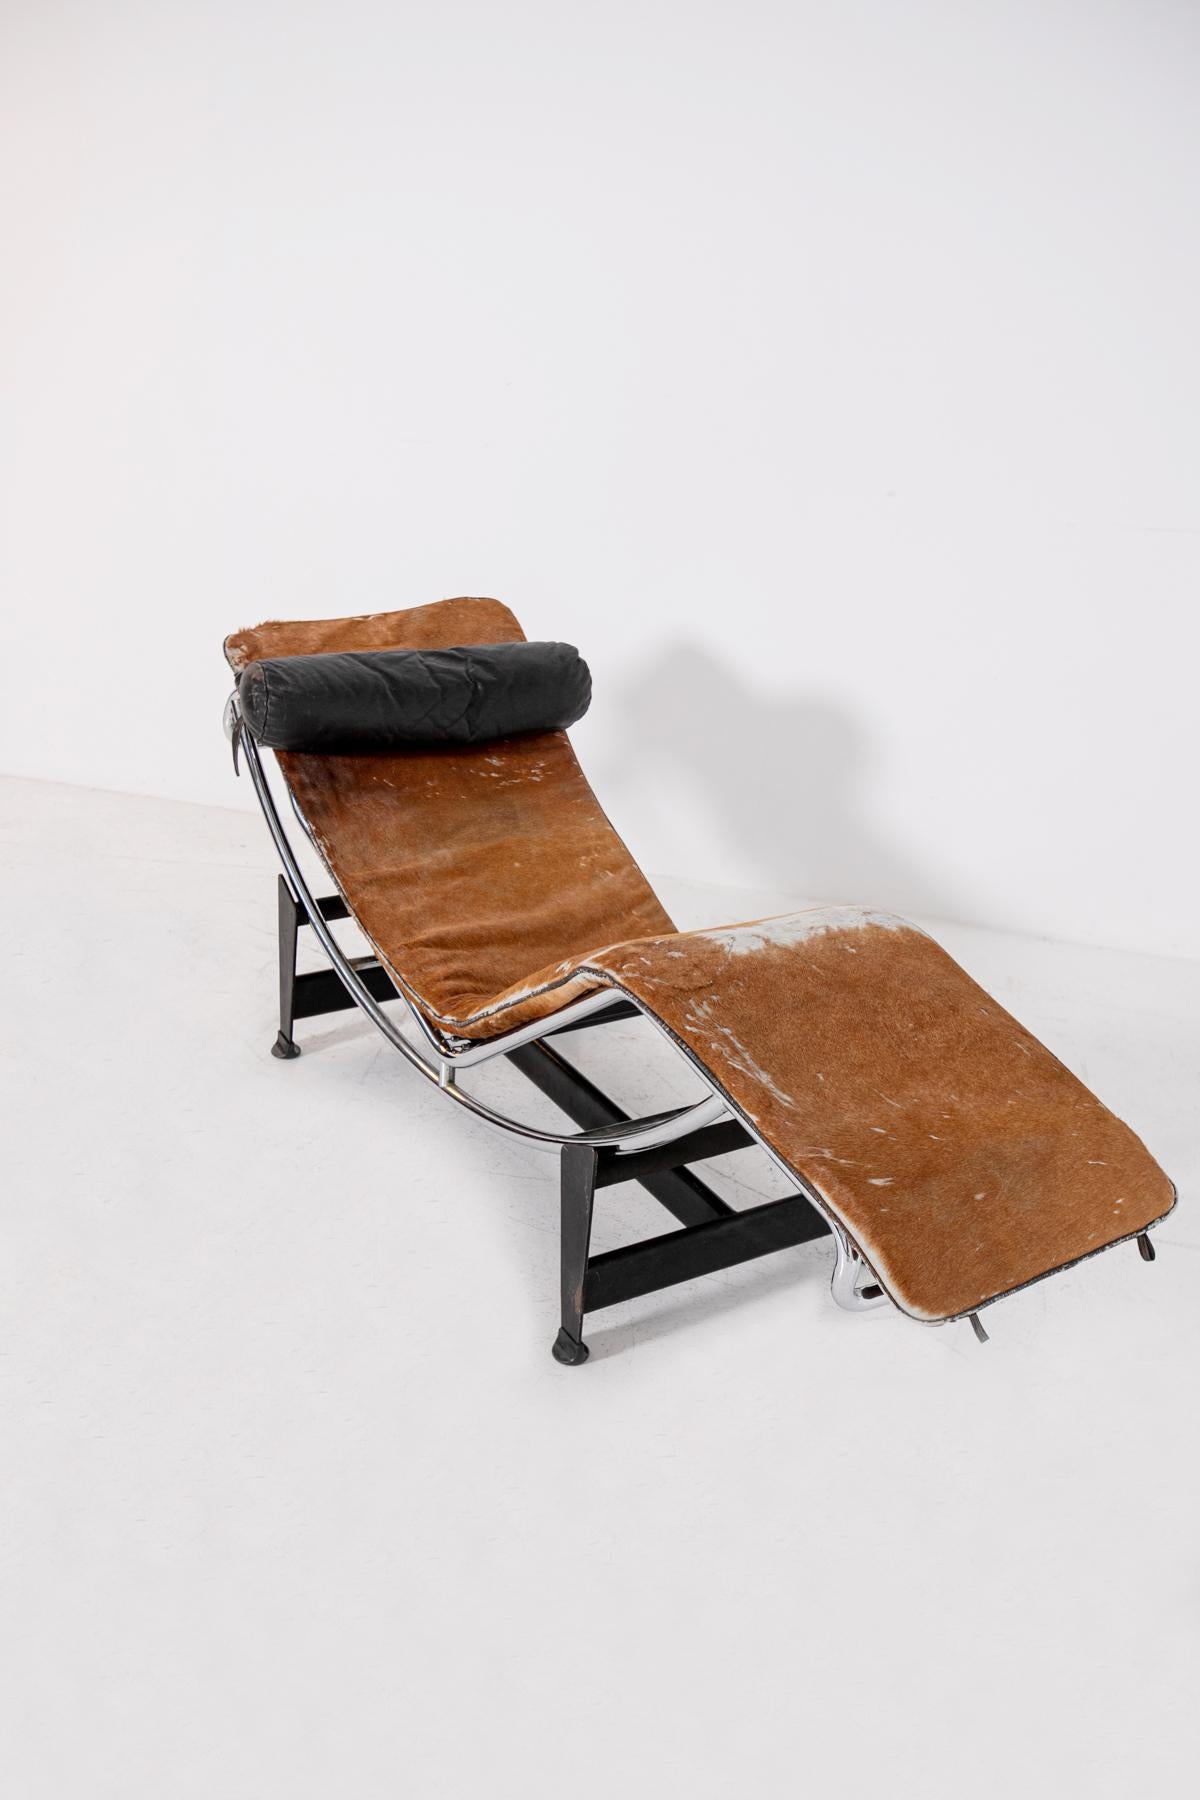 Chaise Longue LC4 by Le Corbusier, C. Perriand, P. Jeanneret for Cassina 1